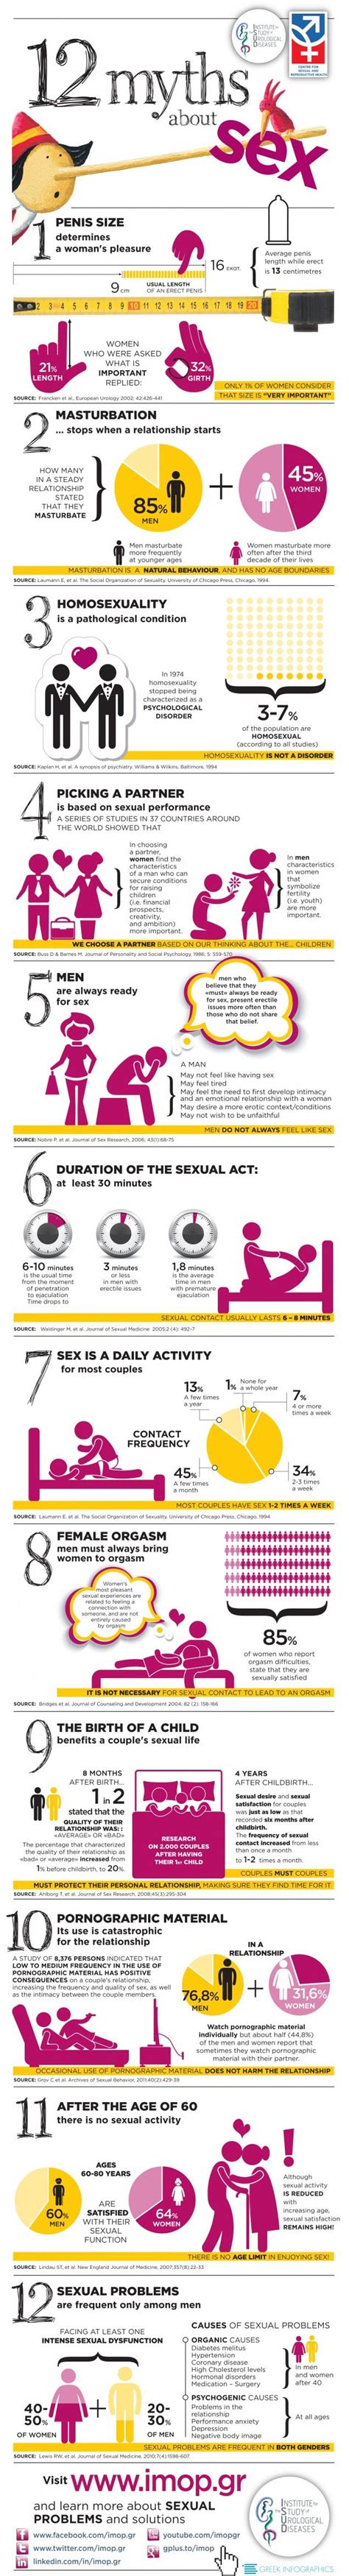 12 Myths About Sex You Need To Stop Believing Infographic Lifehacker Australia